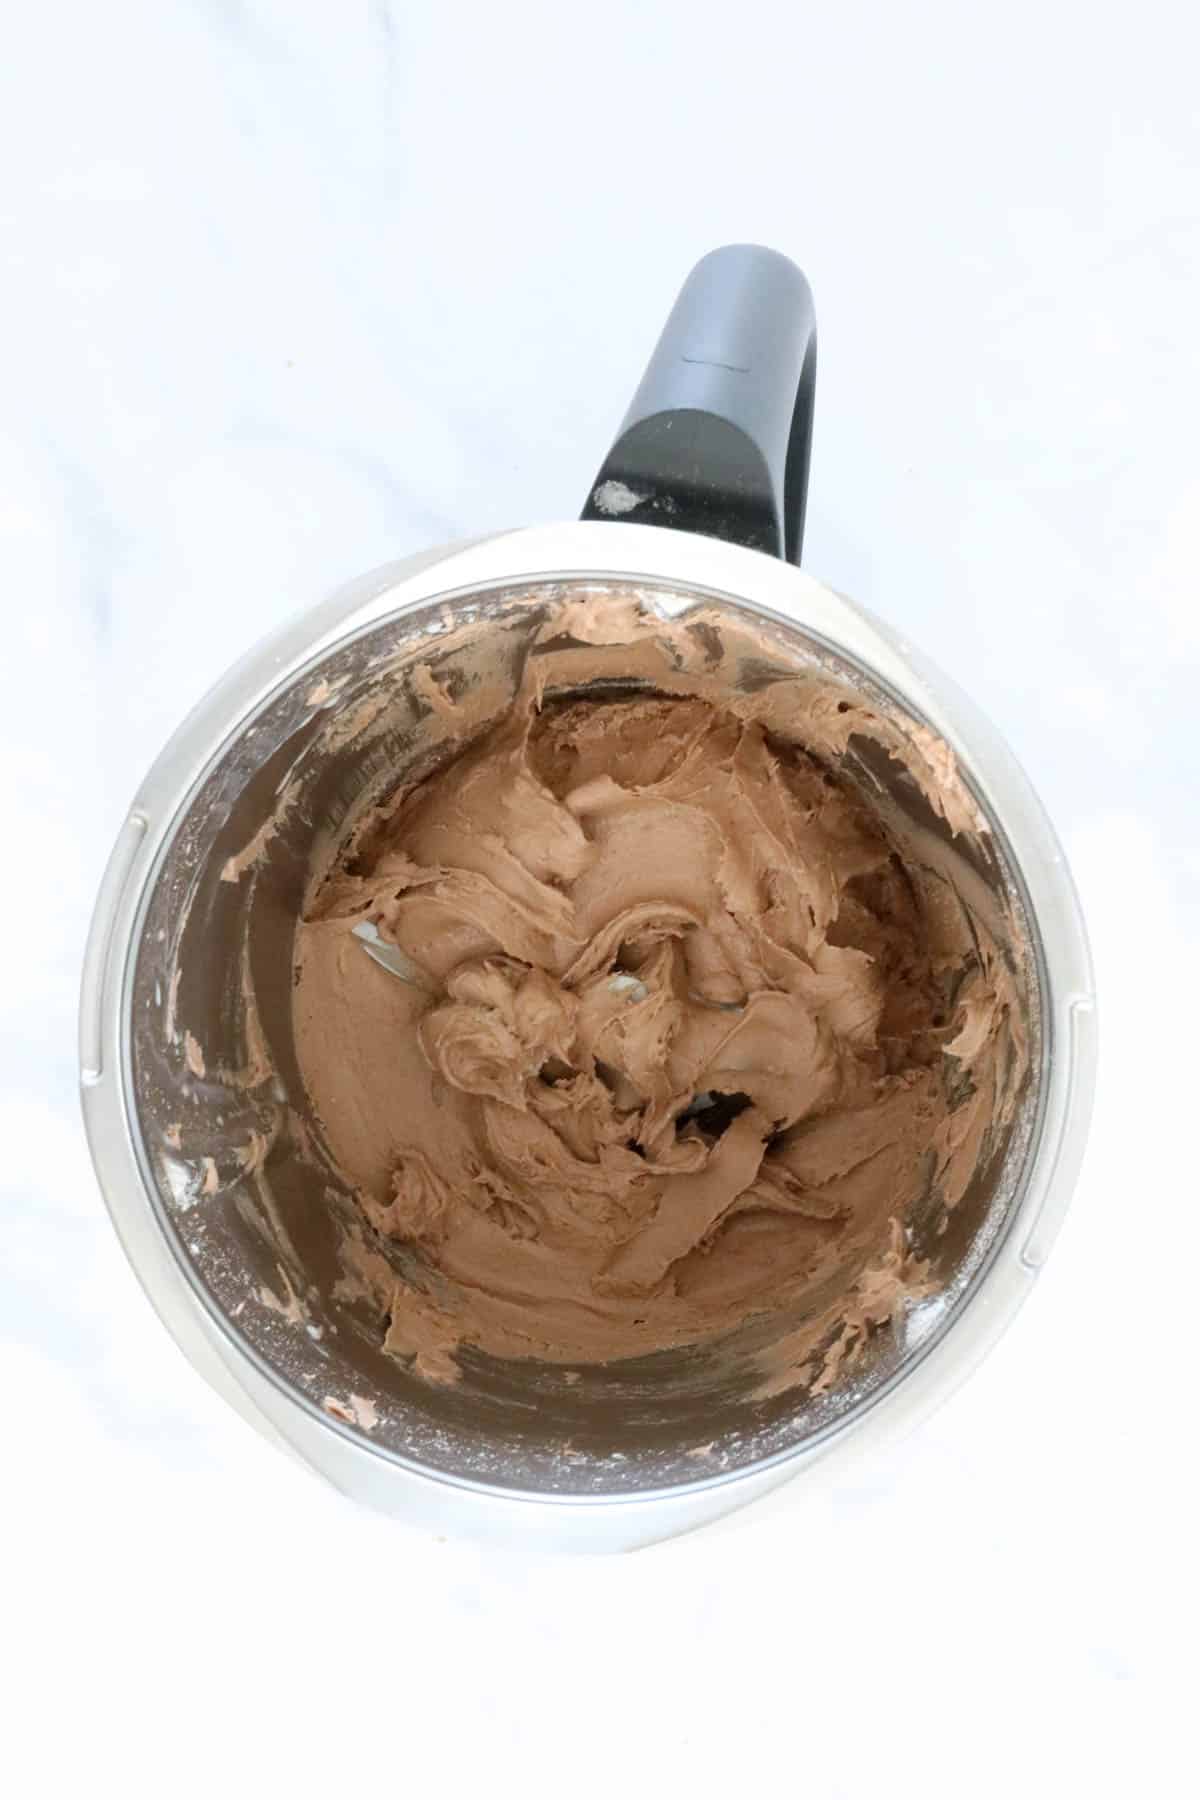 Chocolate frosting in a Thermomix bowl.